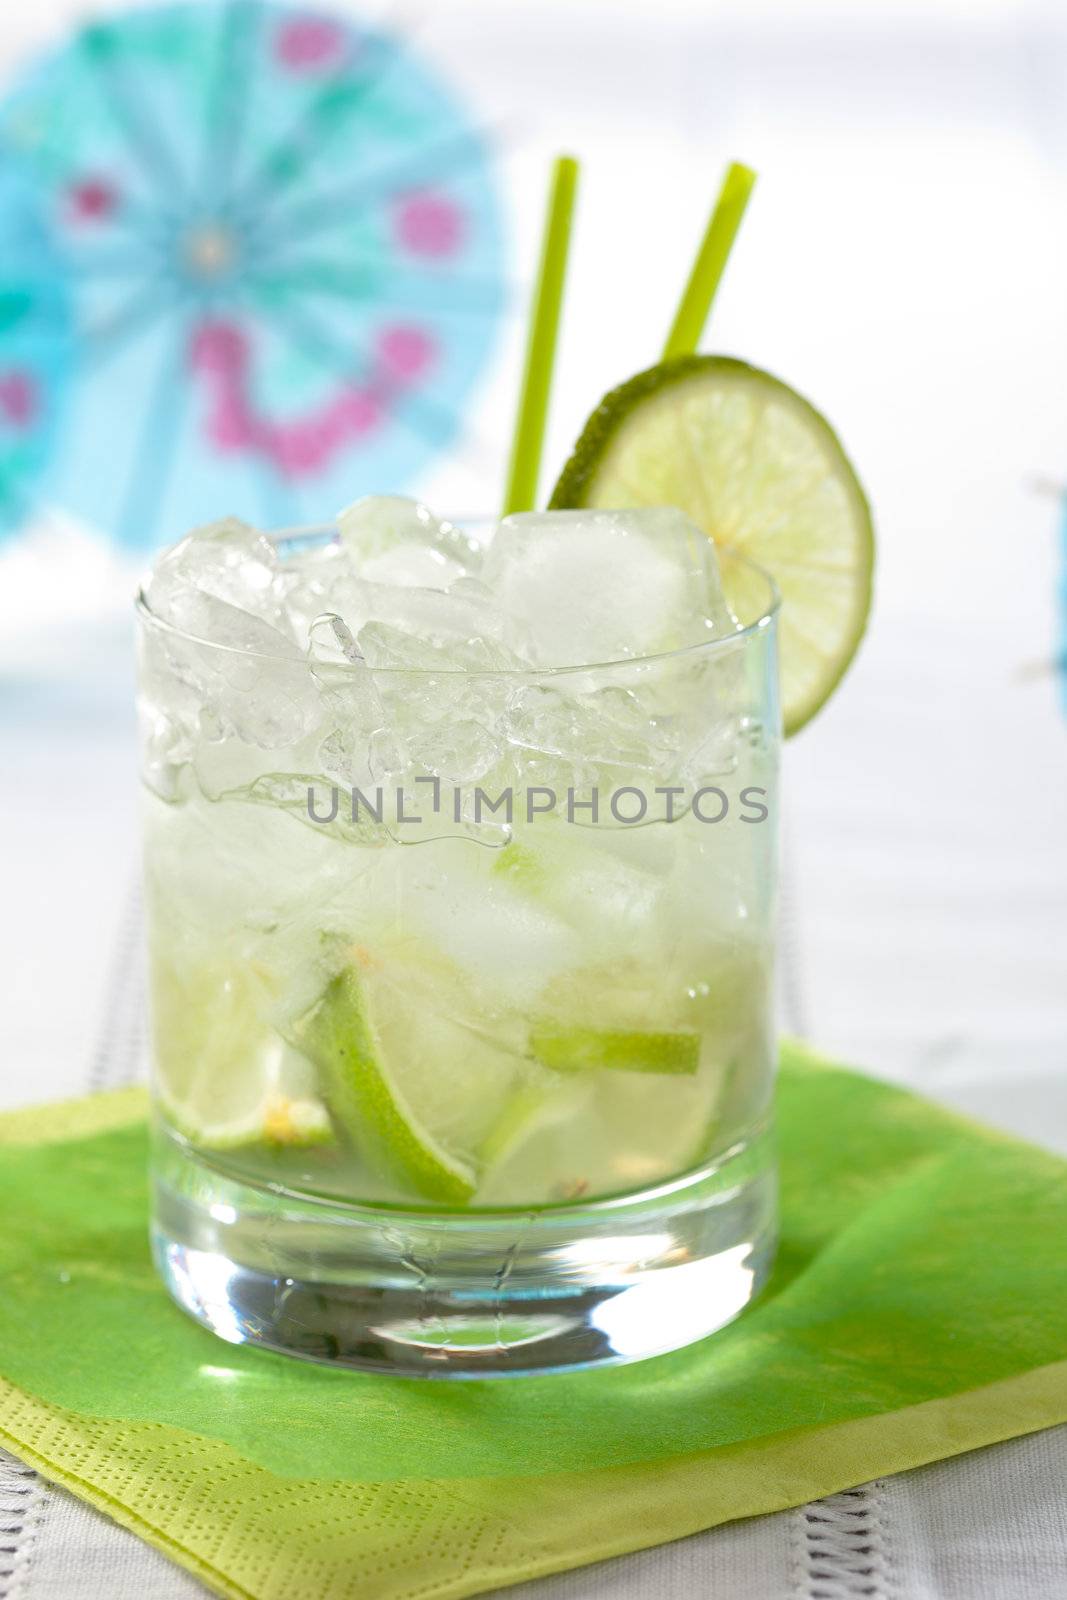 Delicious brazilian drink with lime and cachaca